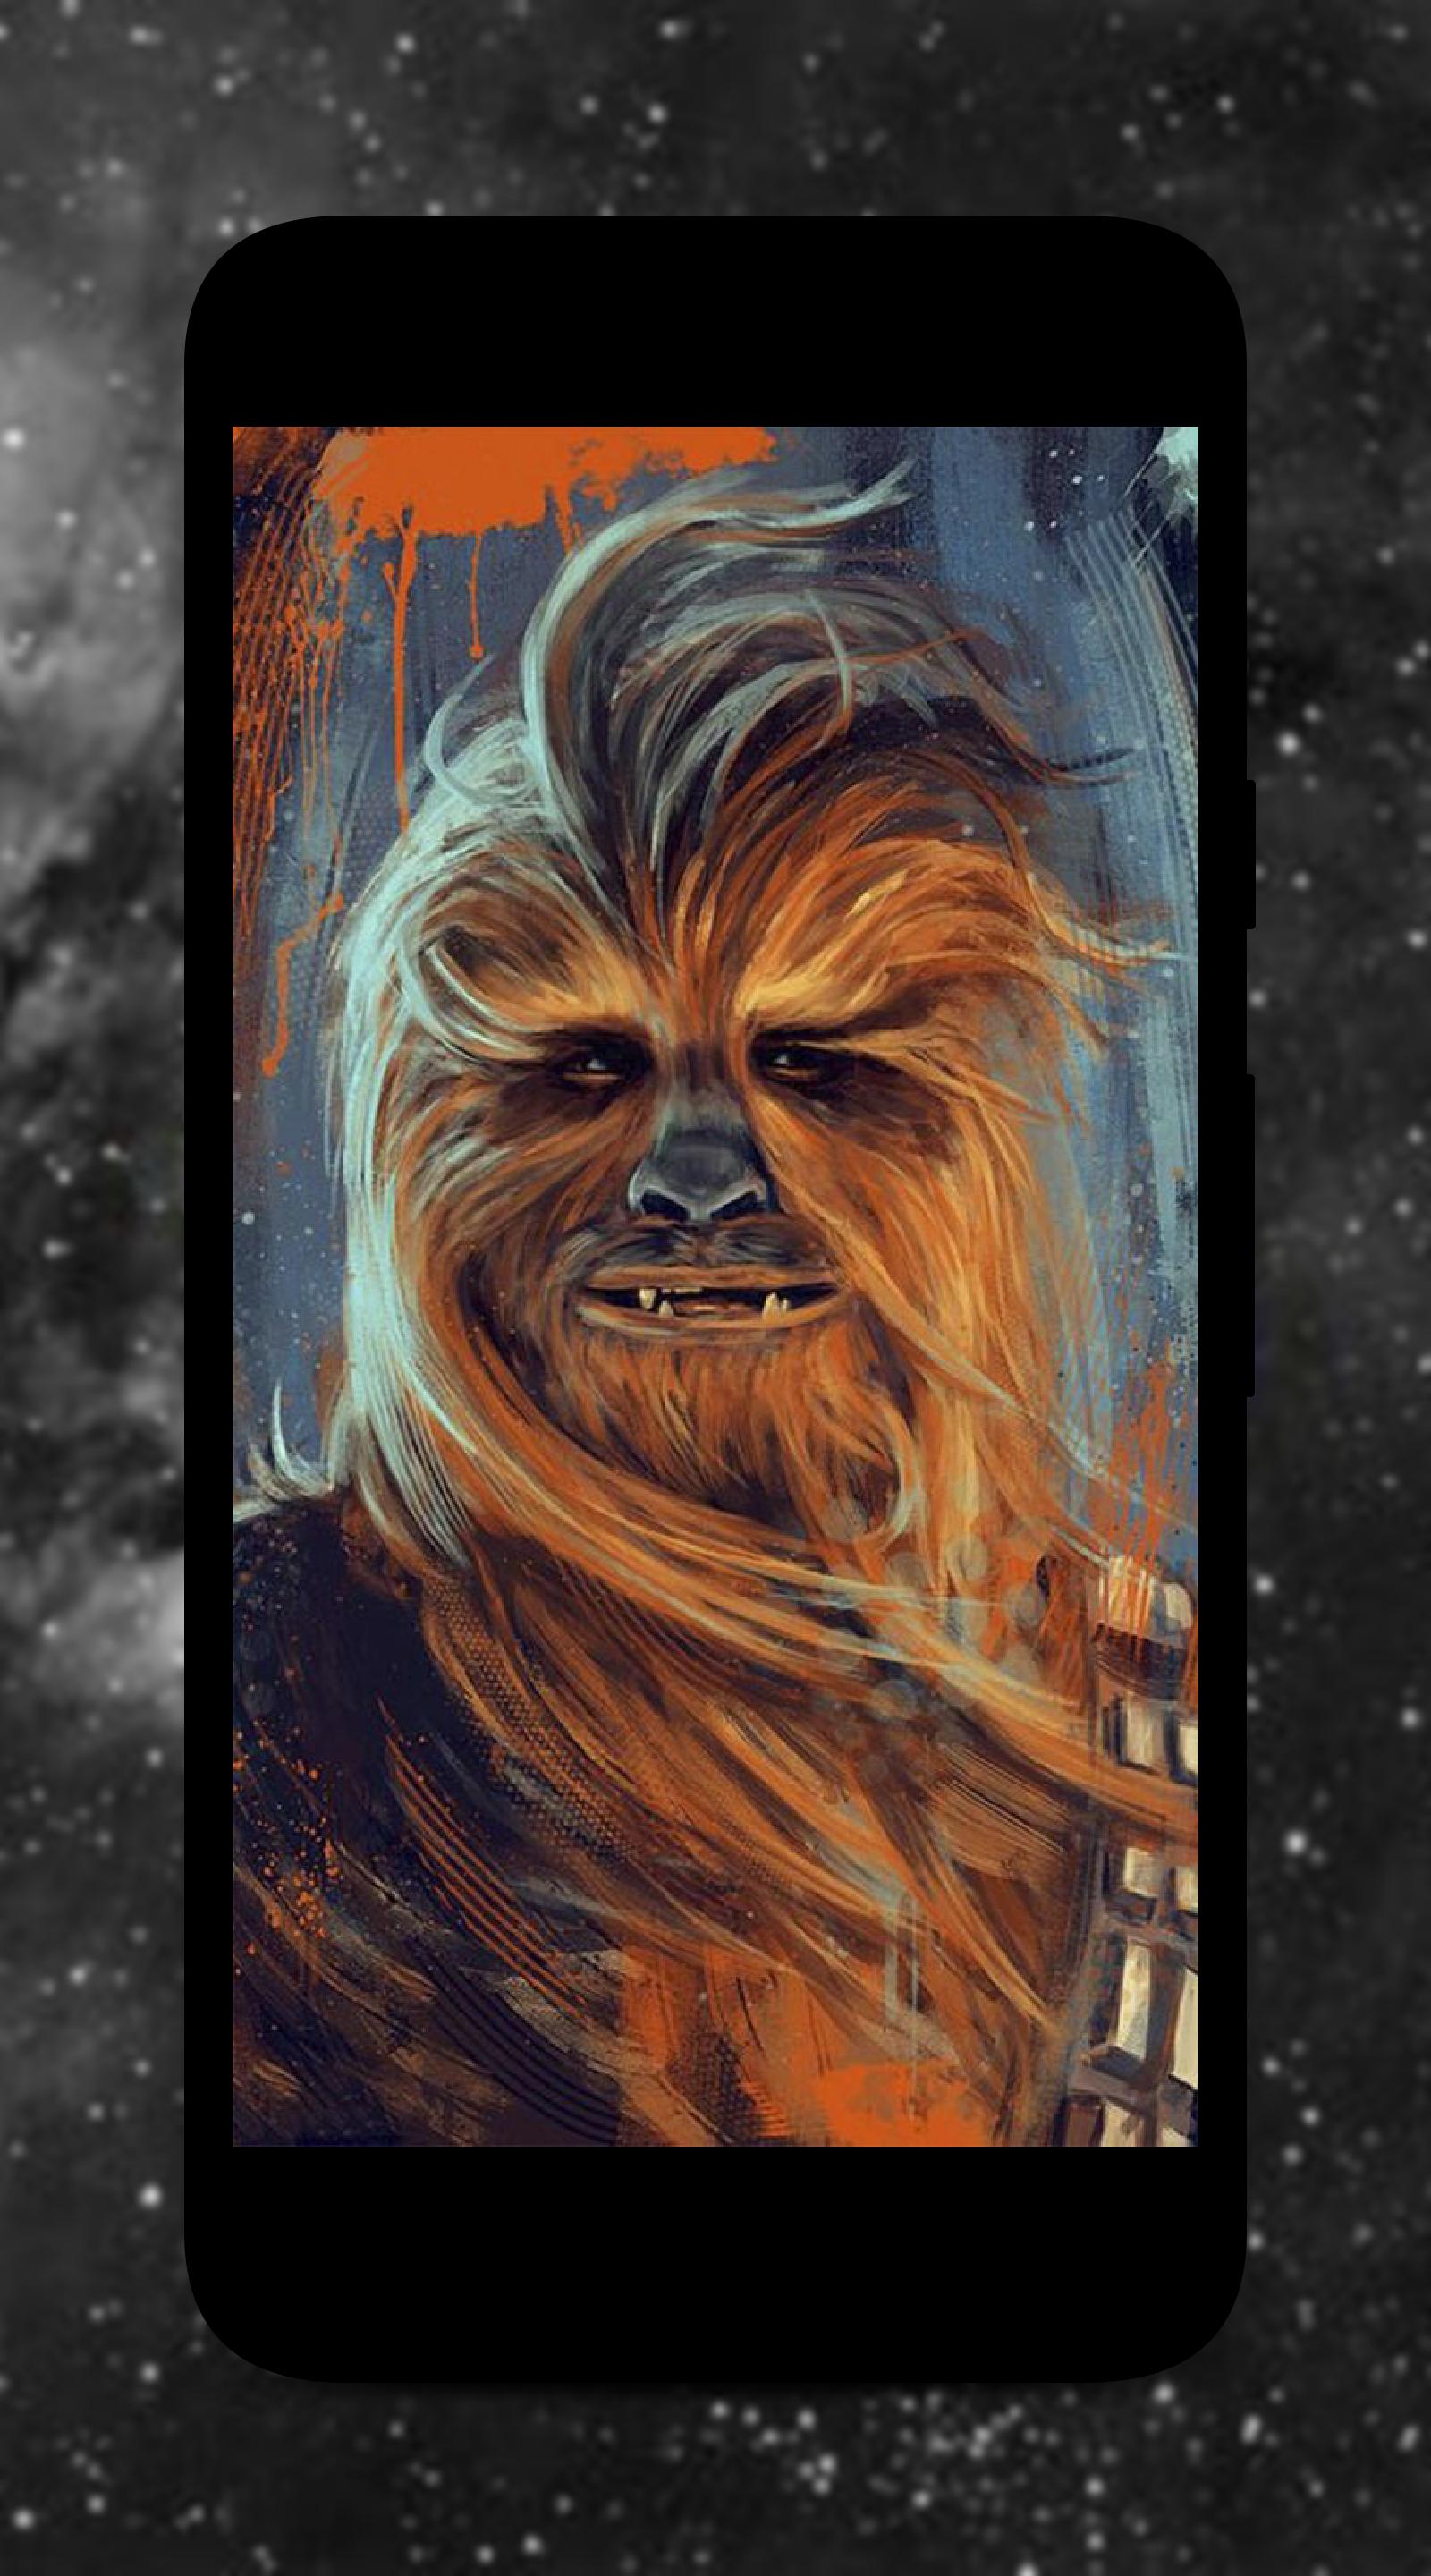 Chewbacca Wallpaper For Android Apk